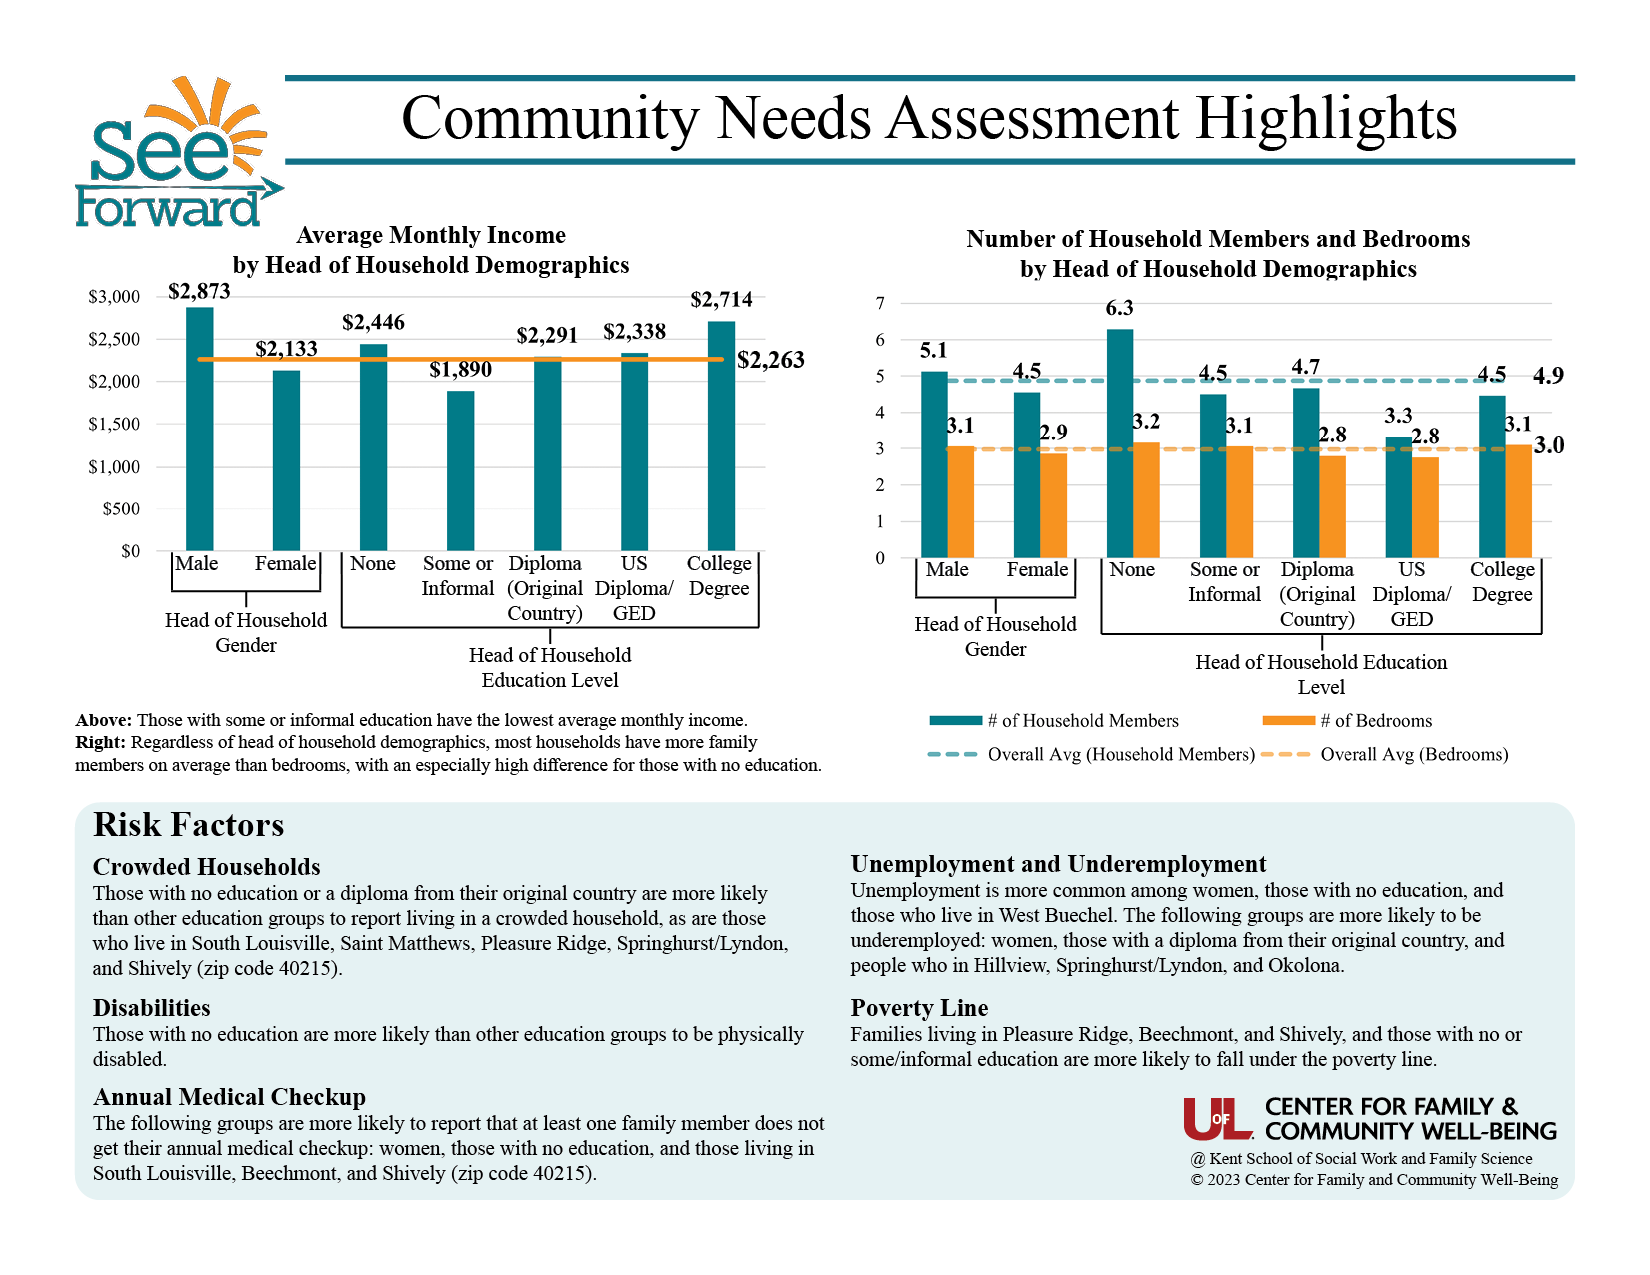 First page of the community needs assessment from October